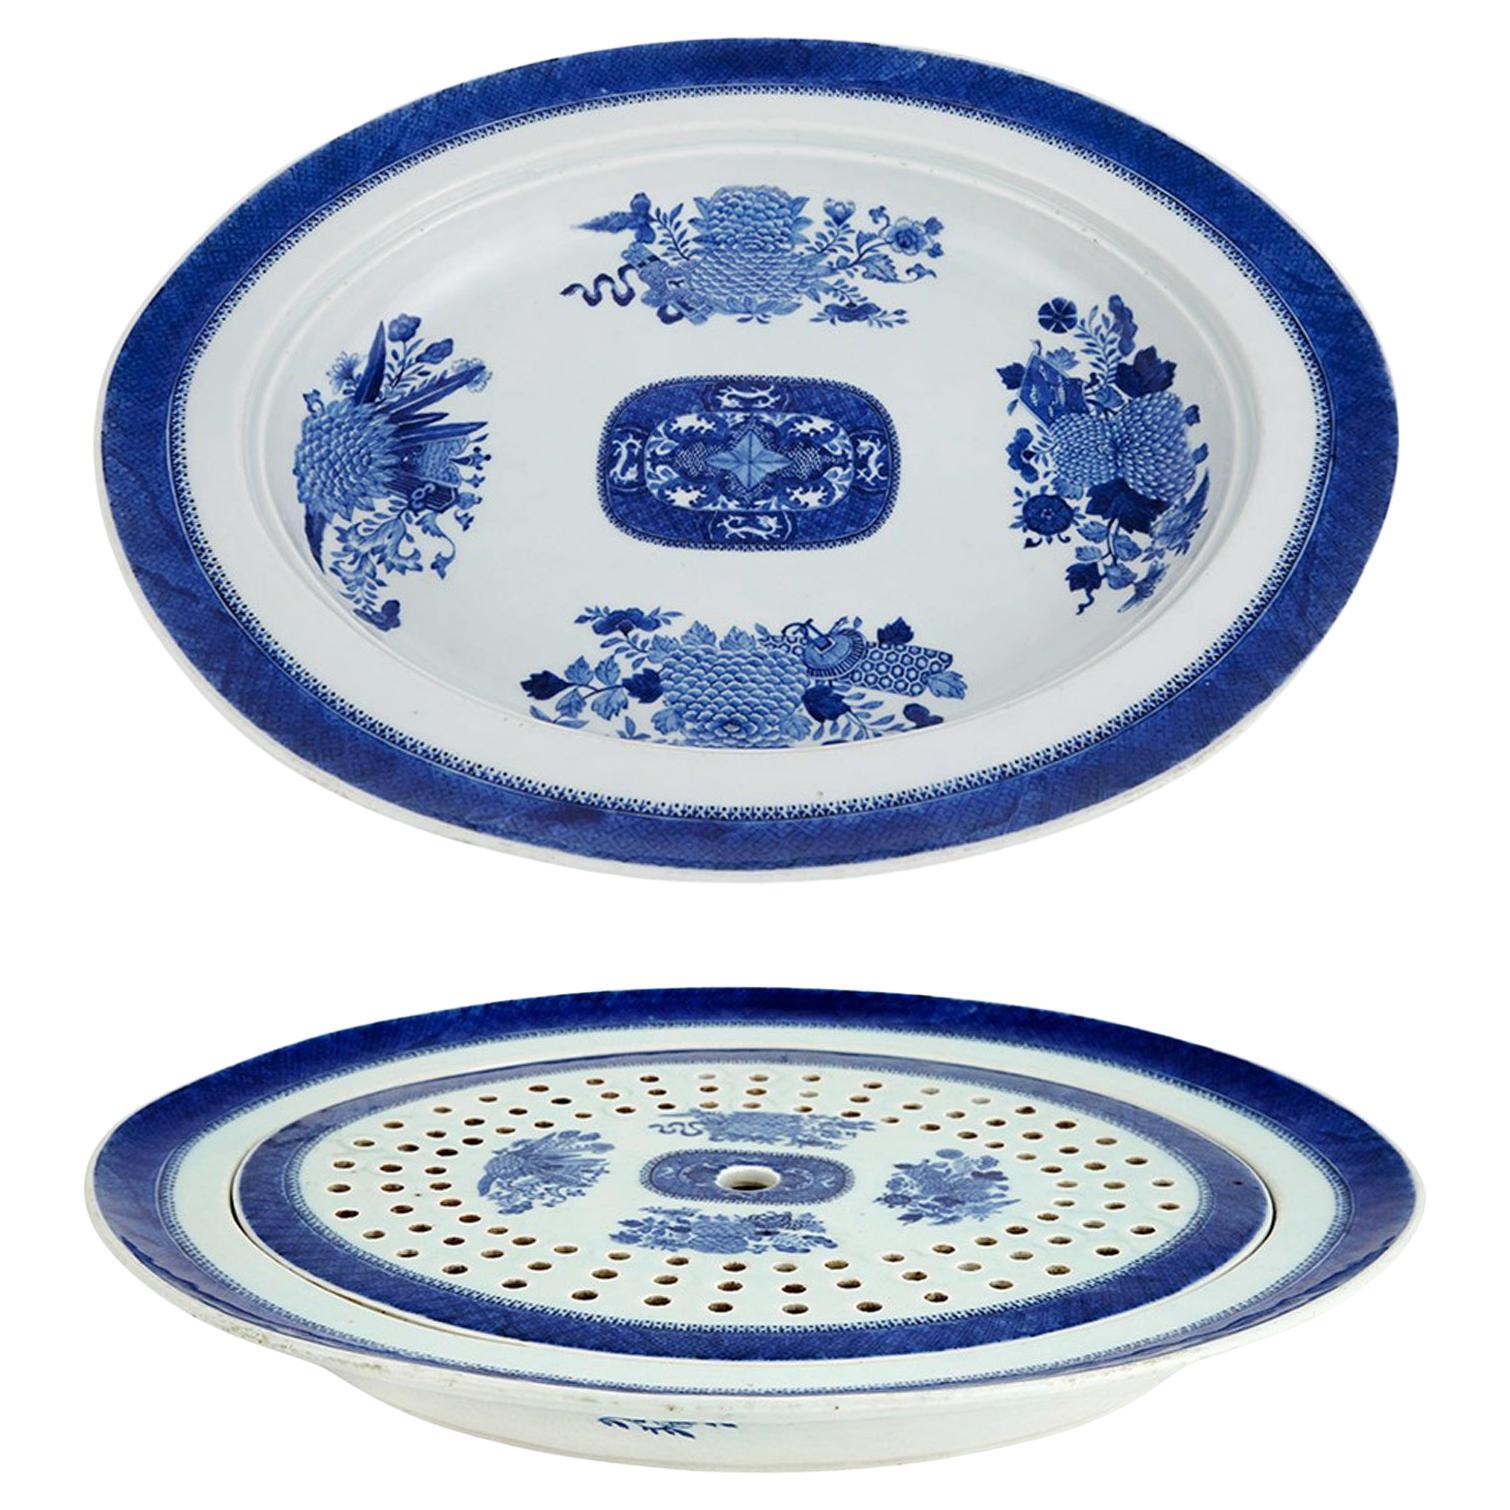 Chinese Export Porcelain Blue Fitzhugh Oval Platter and Mazarin